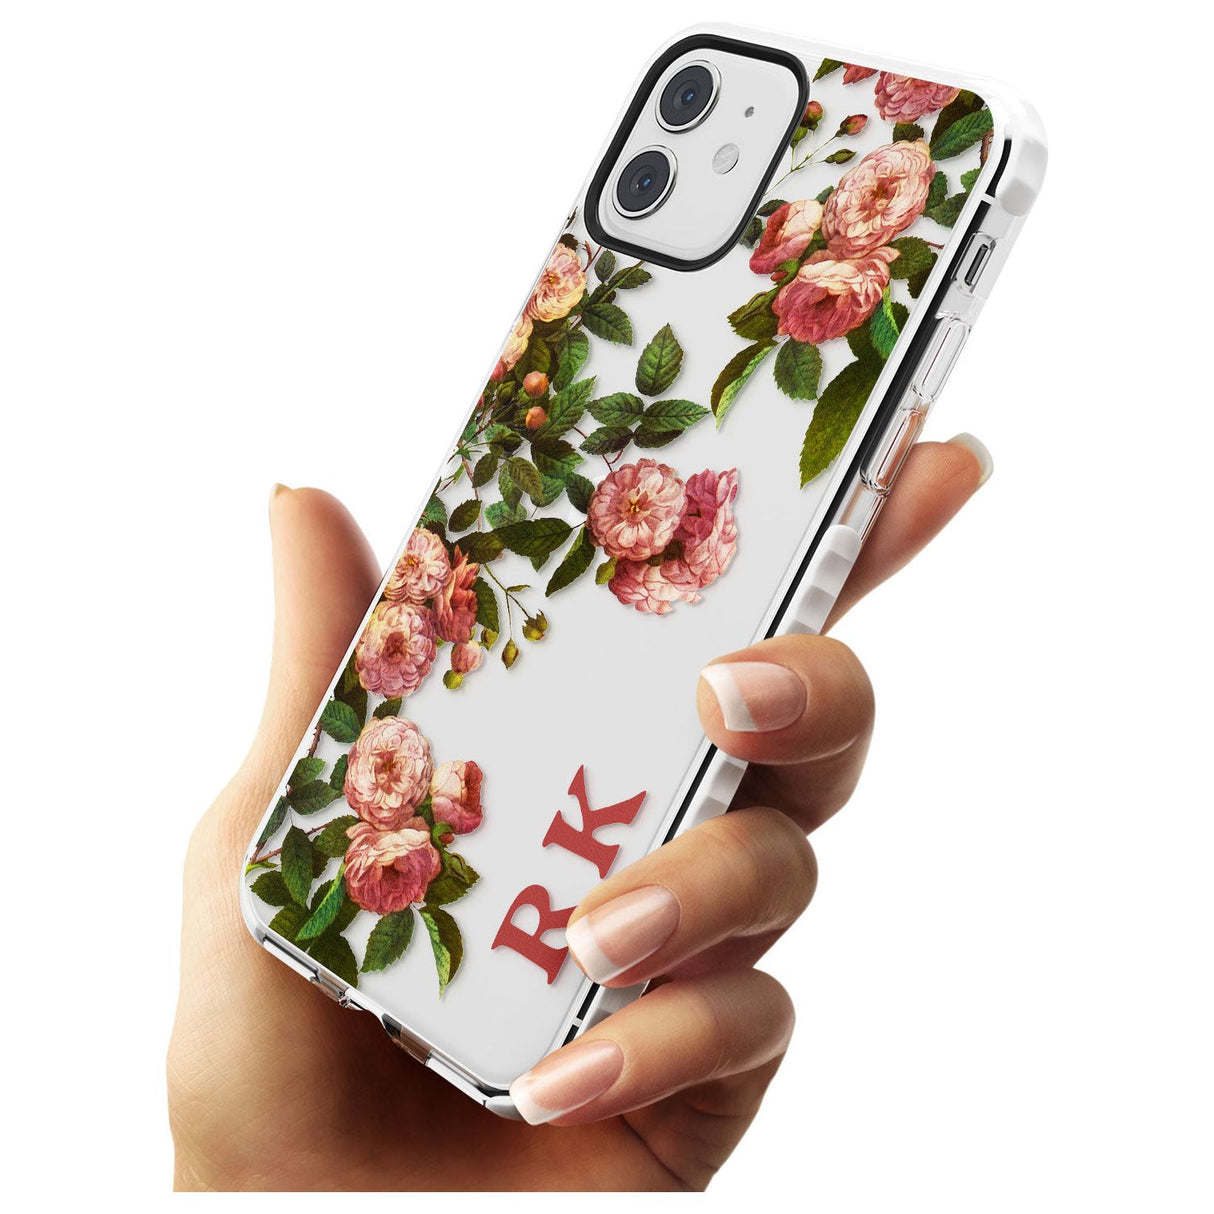 Custom Clear Vintage Floral Pink Garden Roses Impact Phone Case for iPhone 11